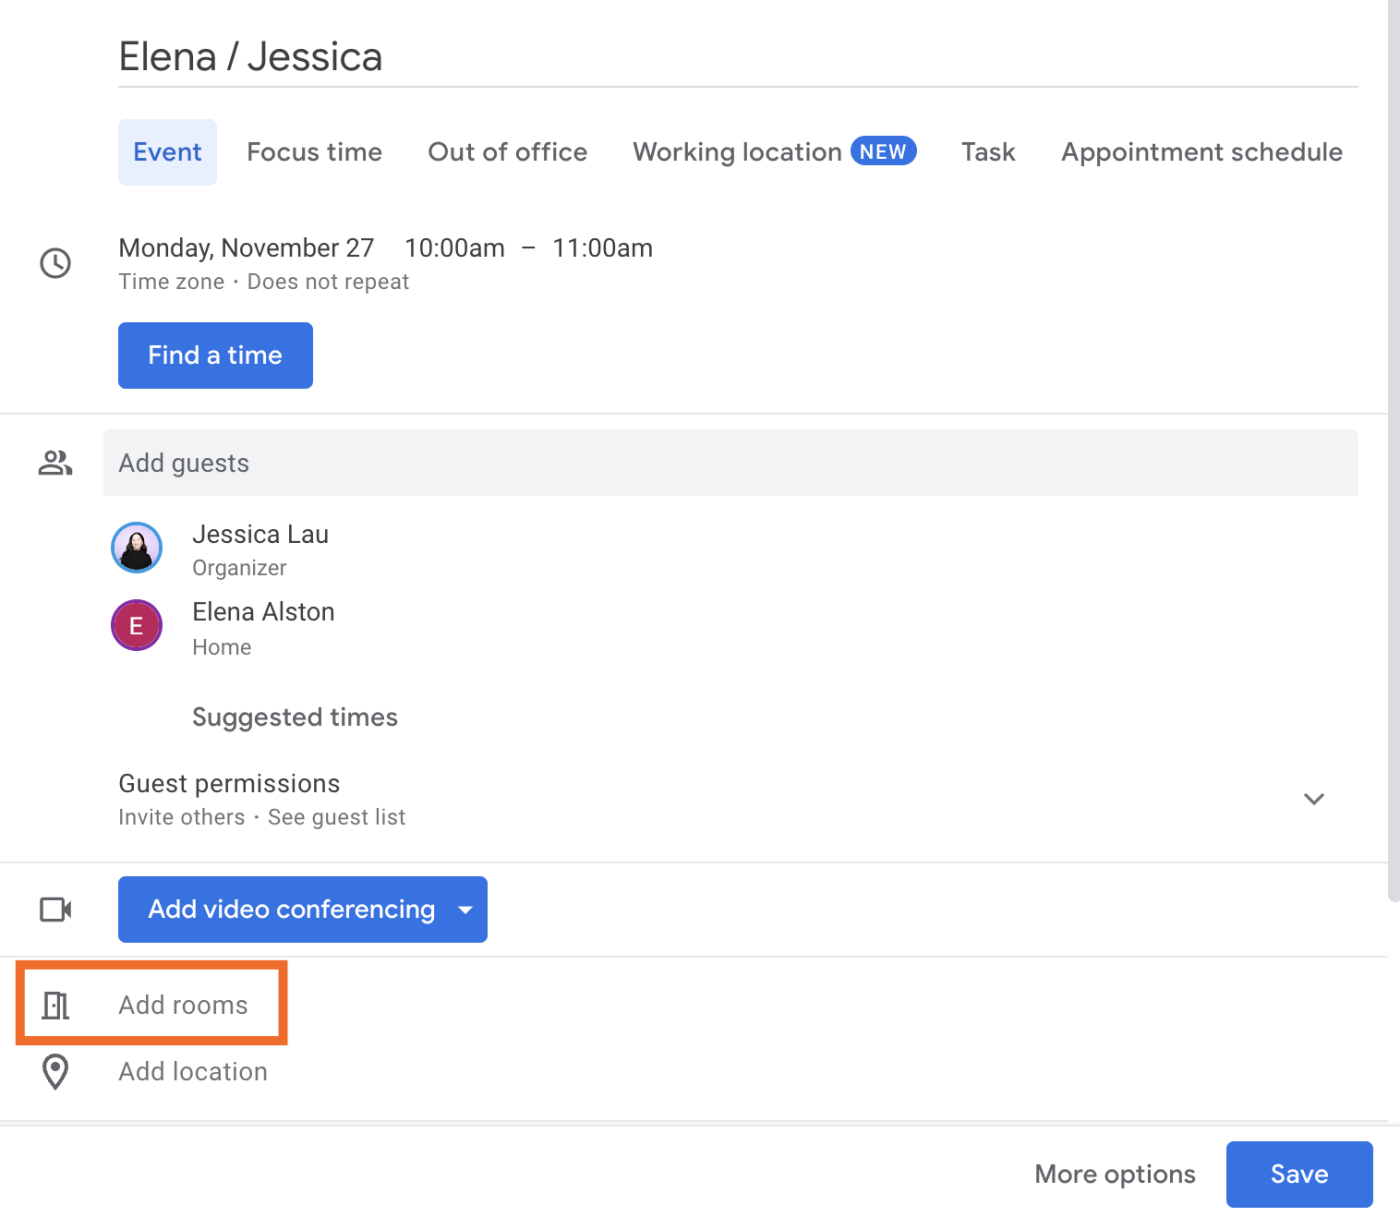 How to add rooms to a Google Calendar event.